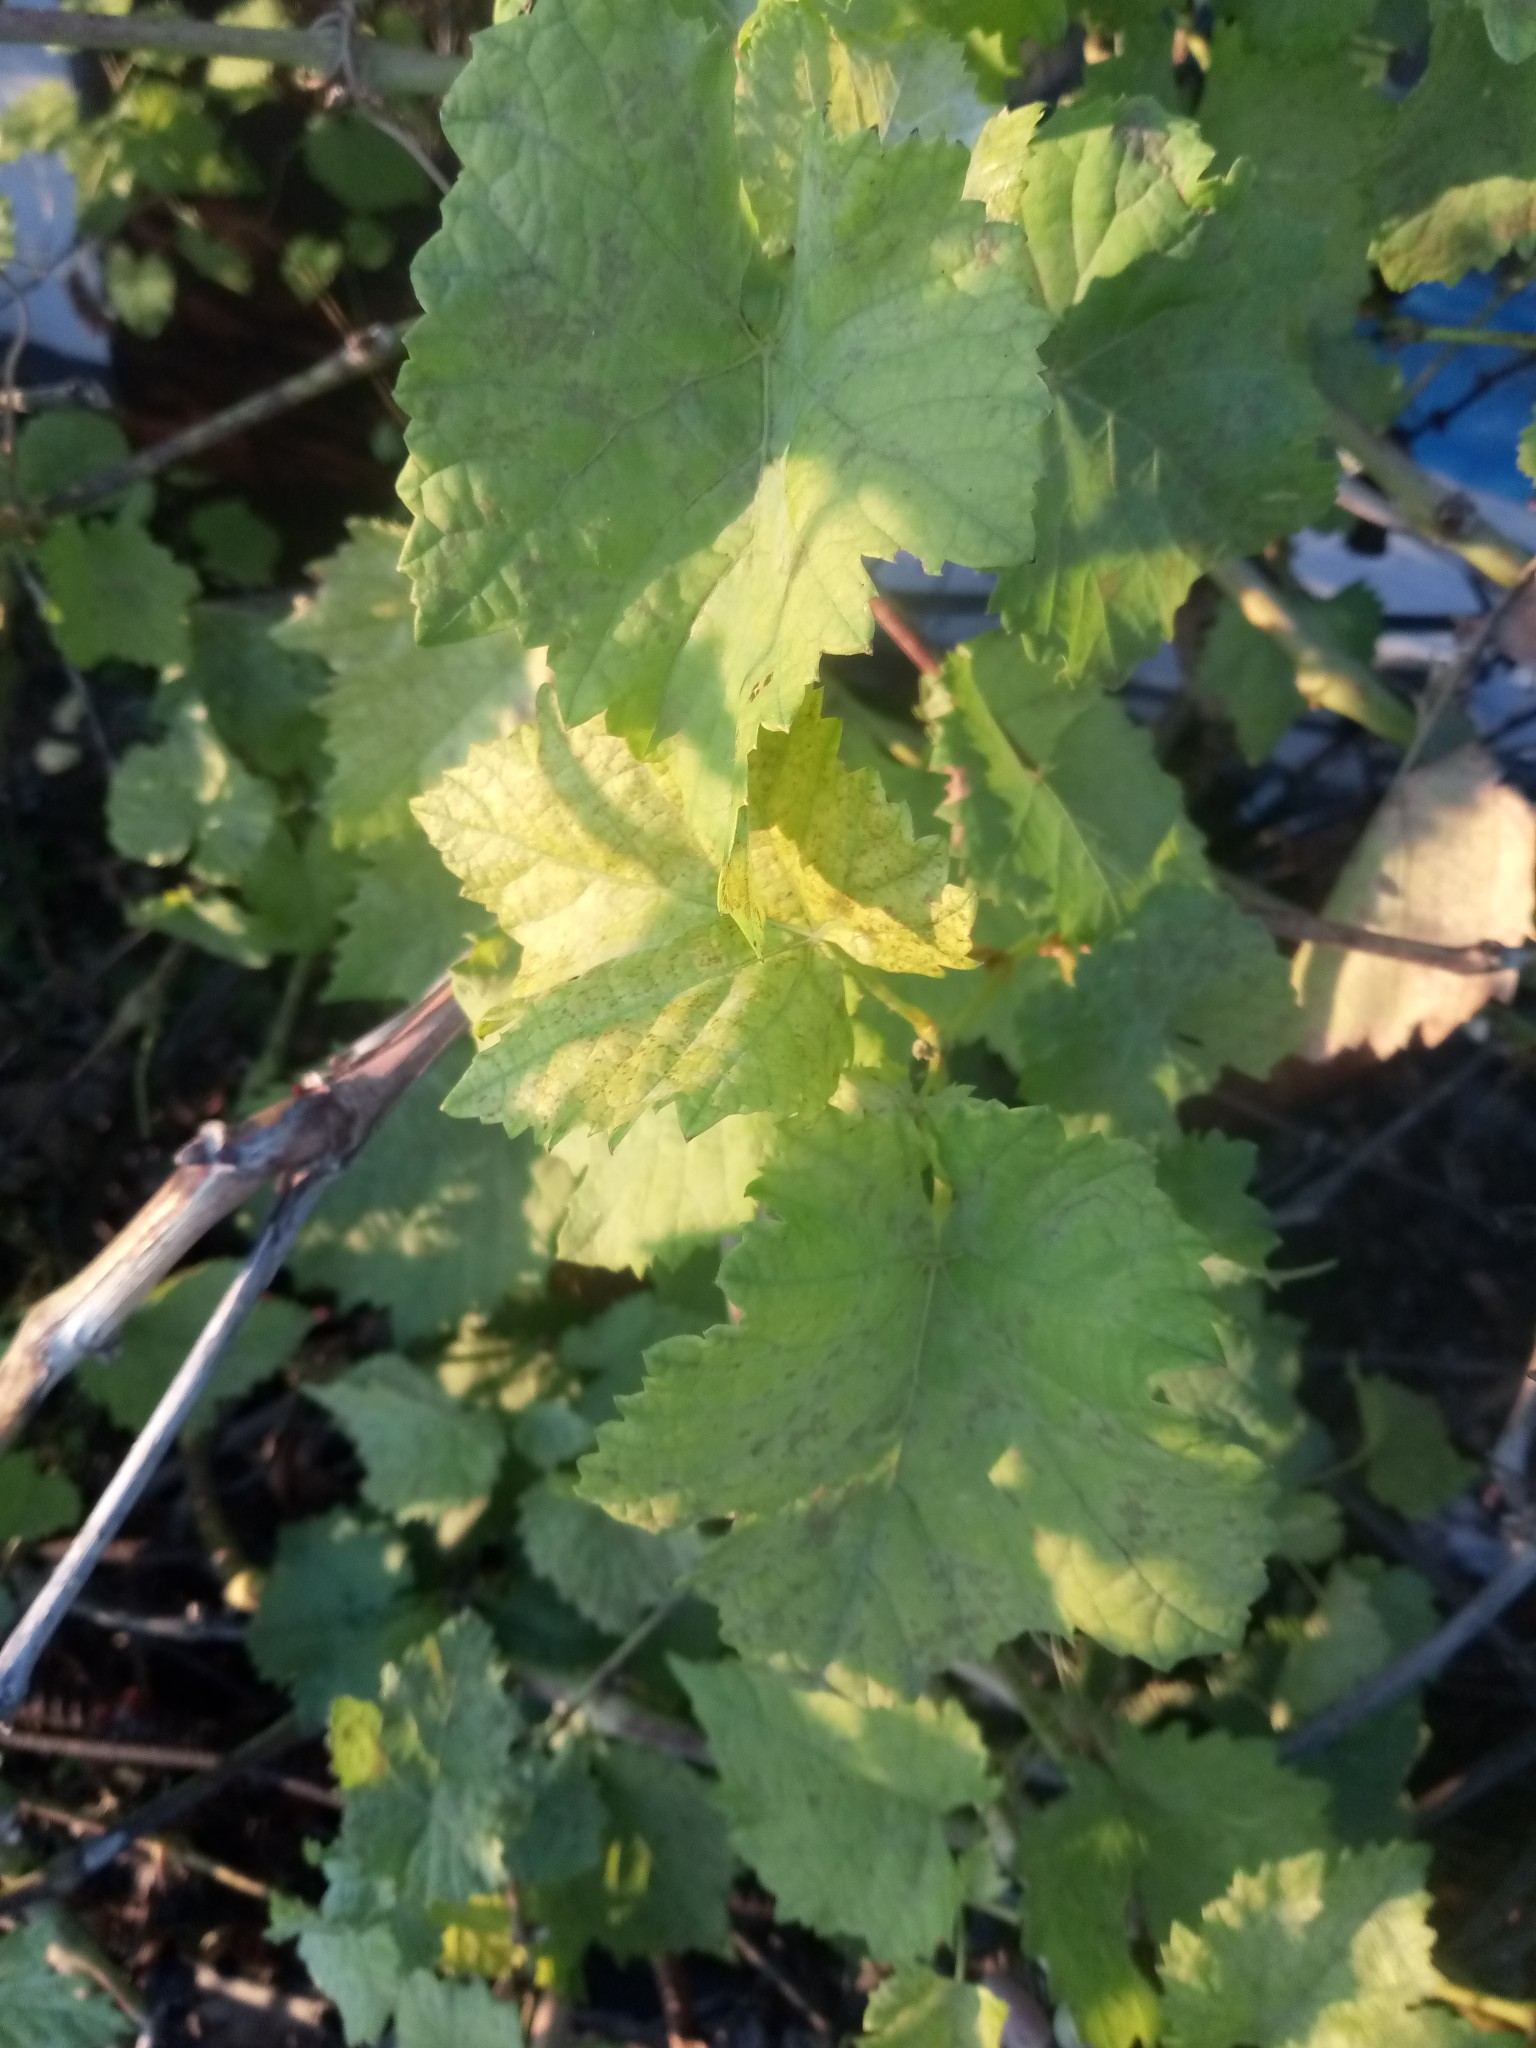 Green leaves of grapes